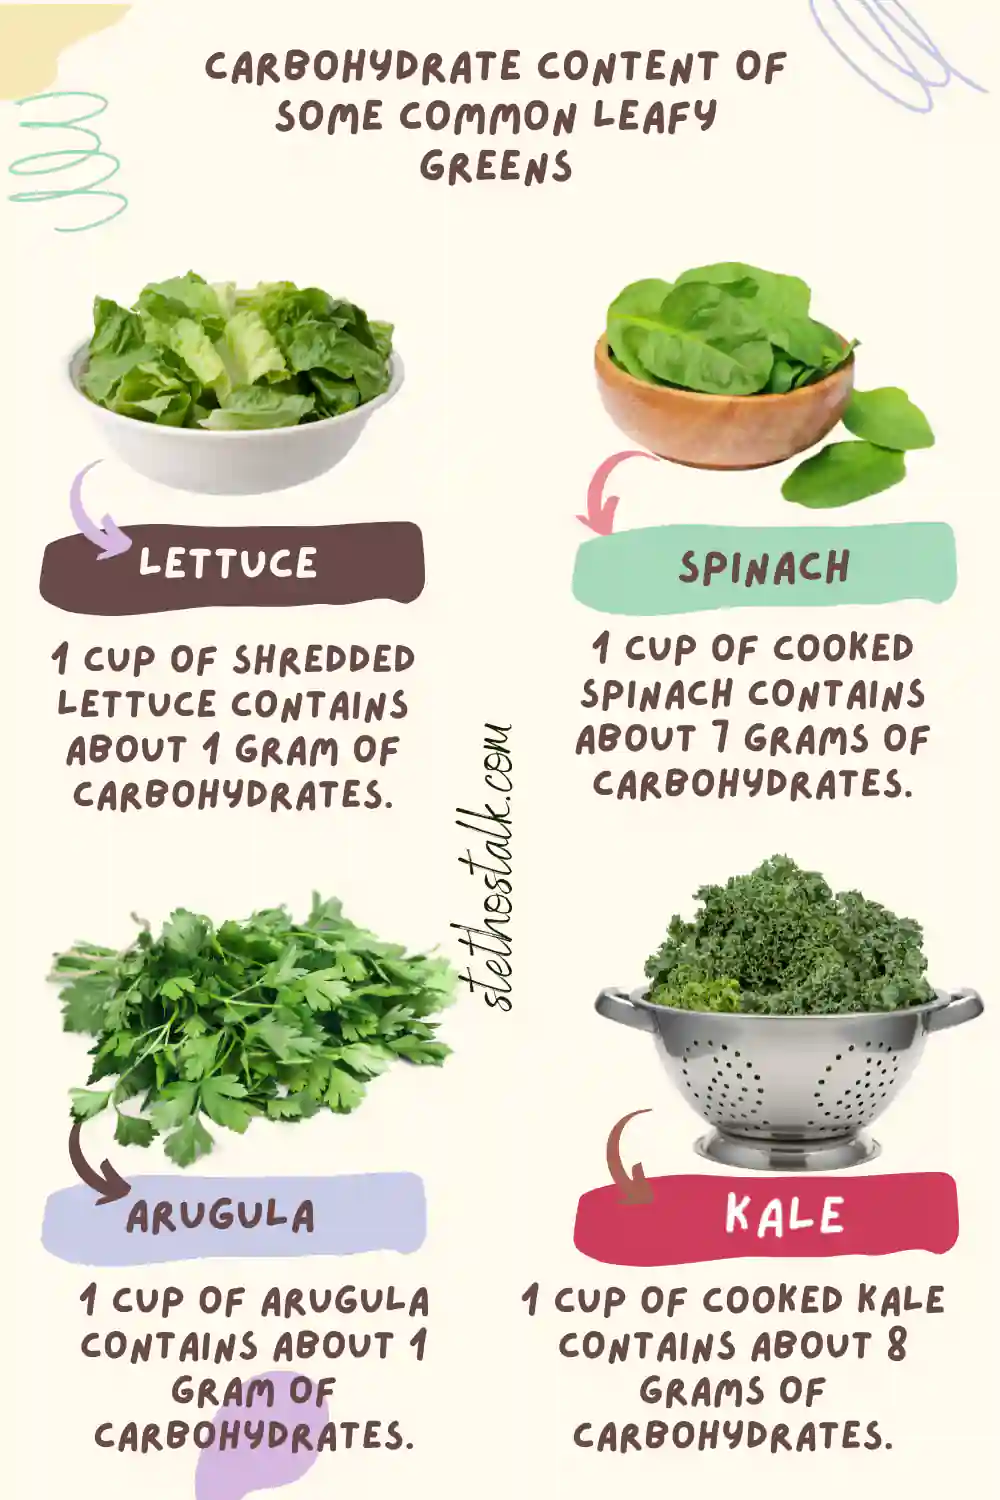 Carbohydrate content of leafy greens